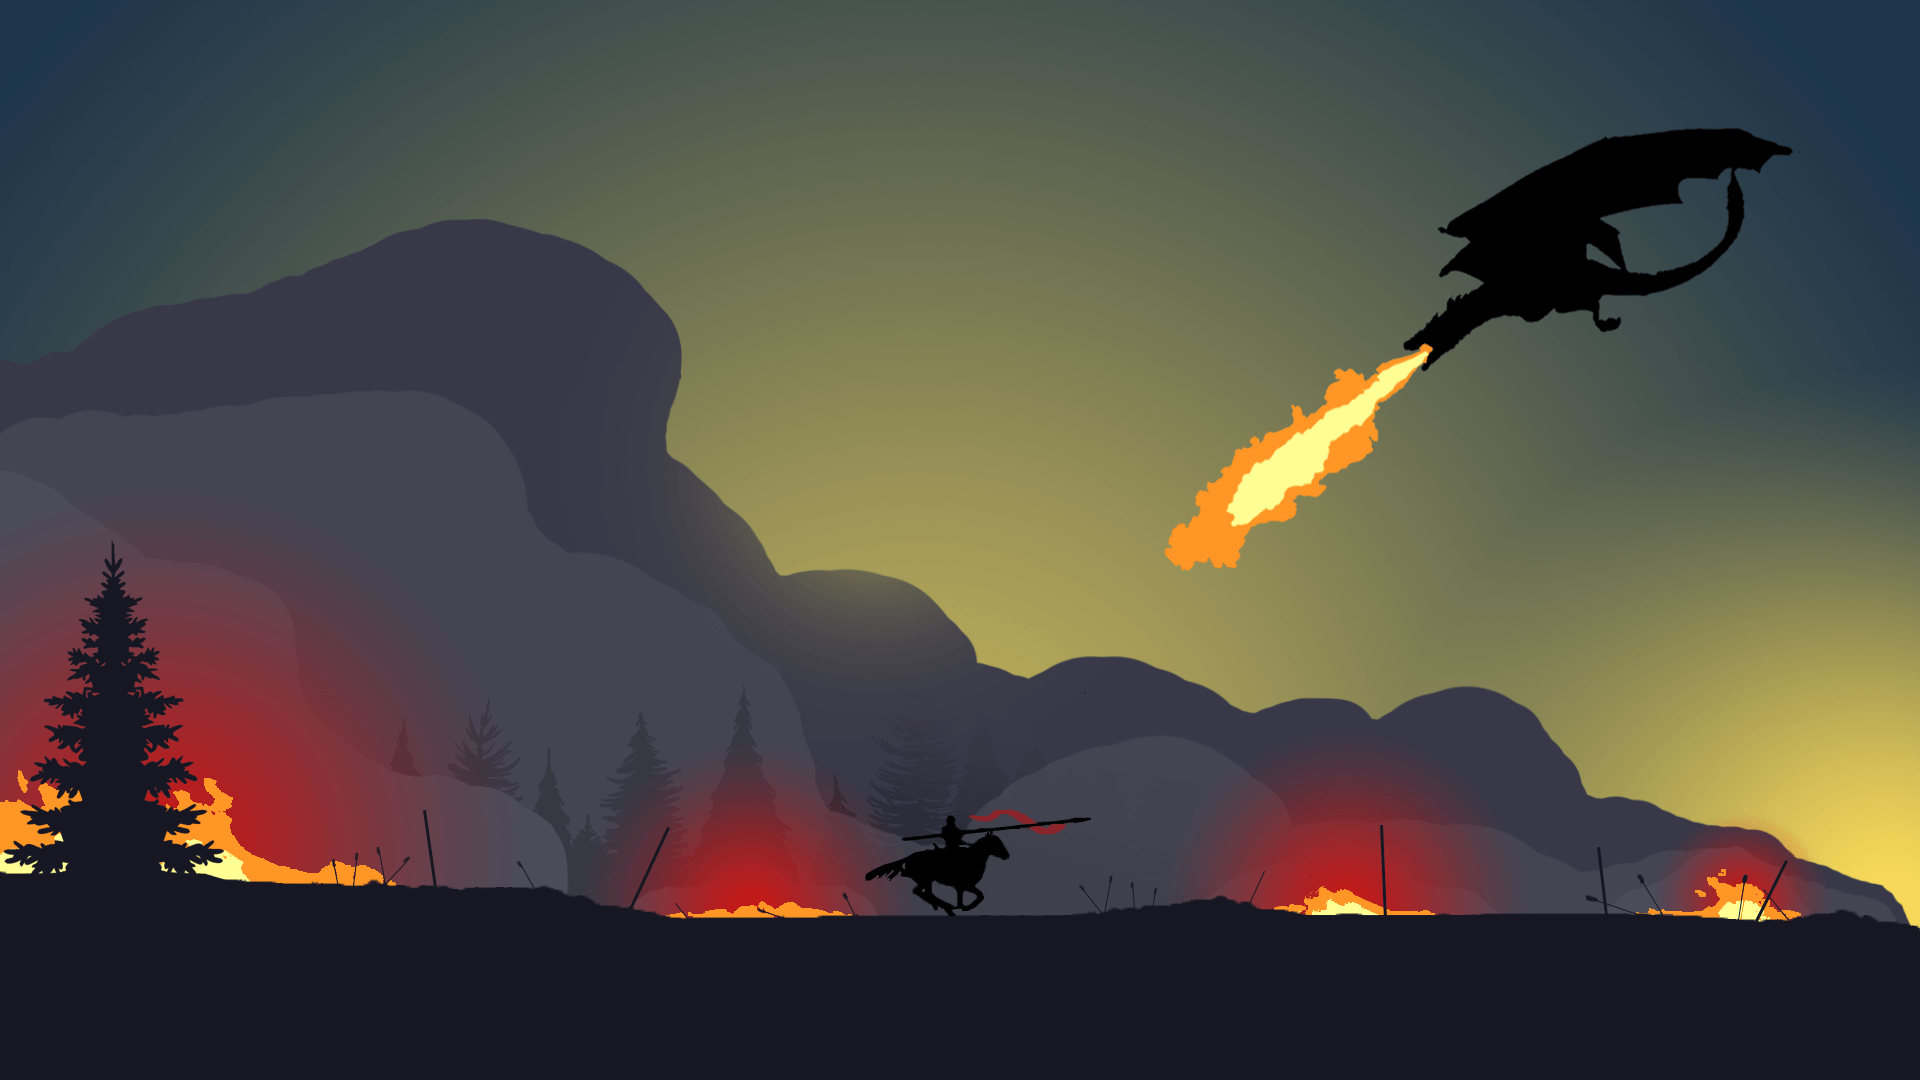 A Flat Wallpaper I Made inspired by 'Field of Fire' Game of Thrones